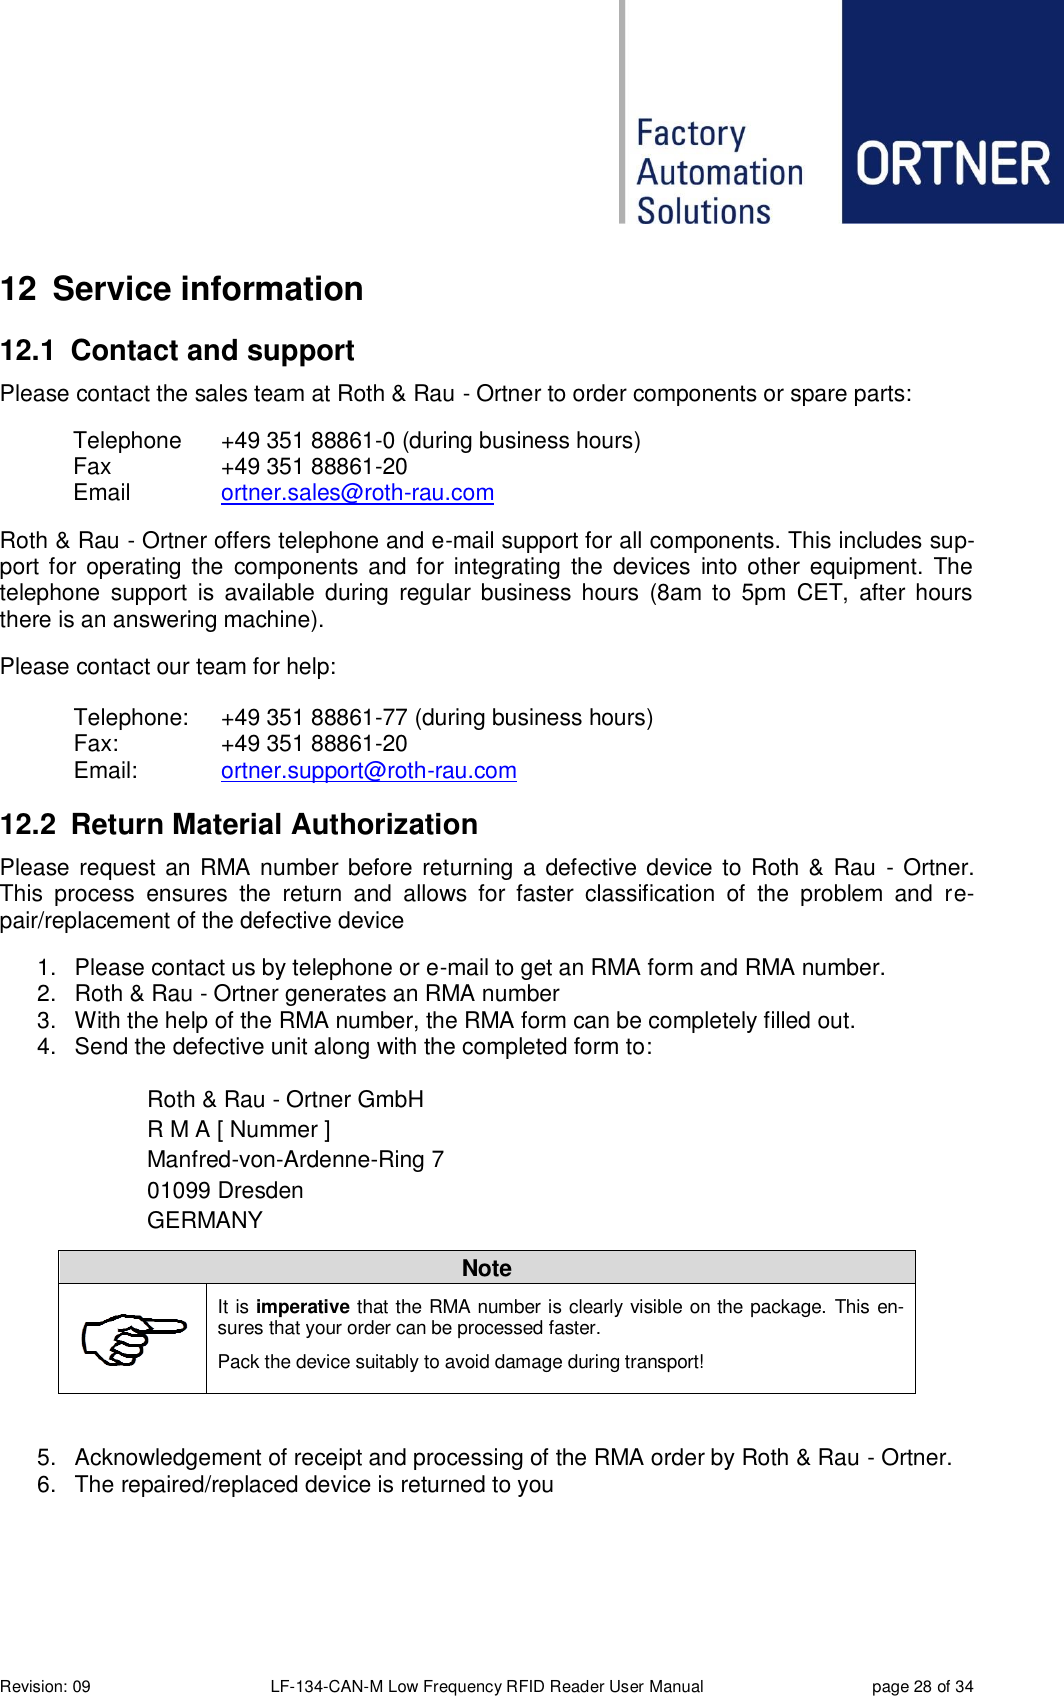  Revision: 09 LF-134-CAN-M Low Frequency RFID Reader User Manual  page 28 of 34 12  Service information 12.1  Contact and support Please contact the sales team at Roth &amp; Rau - Ortner to order components or spare parts: Telephone  +49 351 88861-0 (during business hours) Fax    +49 351 88861-20 Email    ortner.sales@roth-rau.com Roth &amp; Rau - Ortner offers telephone and e-mail support for all components. This includes sup-port for  operating the  components  and for  integrating  the  devices  into other  equipment.  The telephone  support  is  available  during  regular  business  hours  (8am to  5pm  CET,  after  hours there is an answering machine). Please contact our team for help:   Telephone:  +49 351 88861-77 (during business hours)   Fax:    +49 351 88861-20   Email:   ortner.support@roth-rau.com  12.2  Return Material Authorization Please request an RMA number before returning a defective device to Roth &amp; Rau  - Ortner. This  process  ensures  the  return  and  allows  for  faster  classification  of  the  problem  and  re-pair/replacement of the defective device 1.  Please contact us by telephone or e-mail to get an RMA form and RMA number. 2.  Roth &amp; Rau - Ortner generates an RMA number 3.  With the help of the RMA number, the RMA form can be completely filled out. 4.  Send the defective unit along with the completed form to:  Roth &amp; Rau - Ortner GmbH R M A [ Nummer ] Manfred-von-Ardenne-Ring 7 01099 Dresden GERMANY Note  It is imperative that the RMA number is clearly visible on the package. This en-sures that your order can be processed faster. Pack the device suitably to avoid damage during transport!  5.  Acknowledgement of receipt and processing of the RMA order by Roth &amp; Rau - Ortner.   6.  The repaired/replaced device is returned to you  